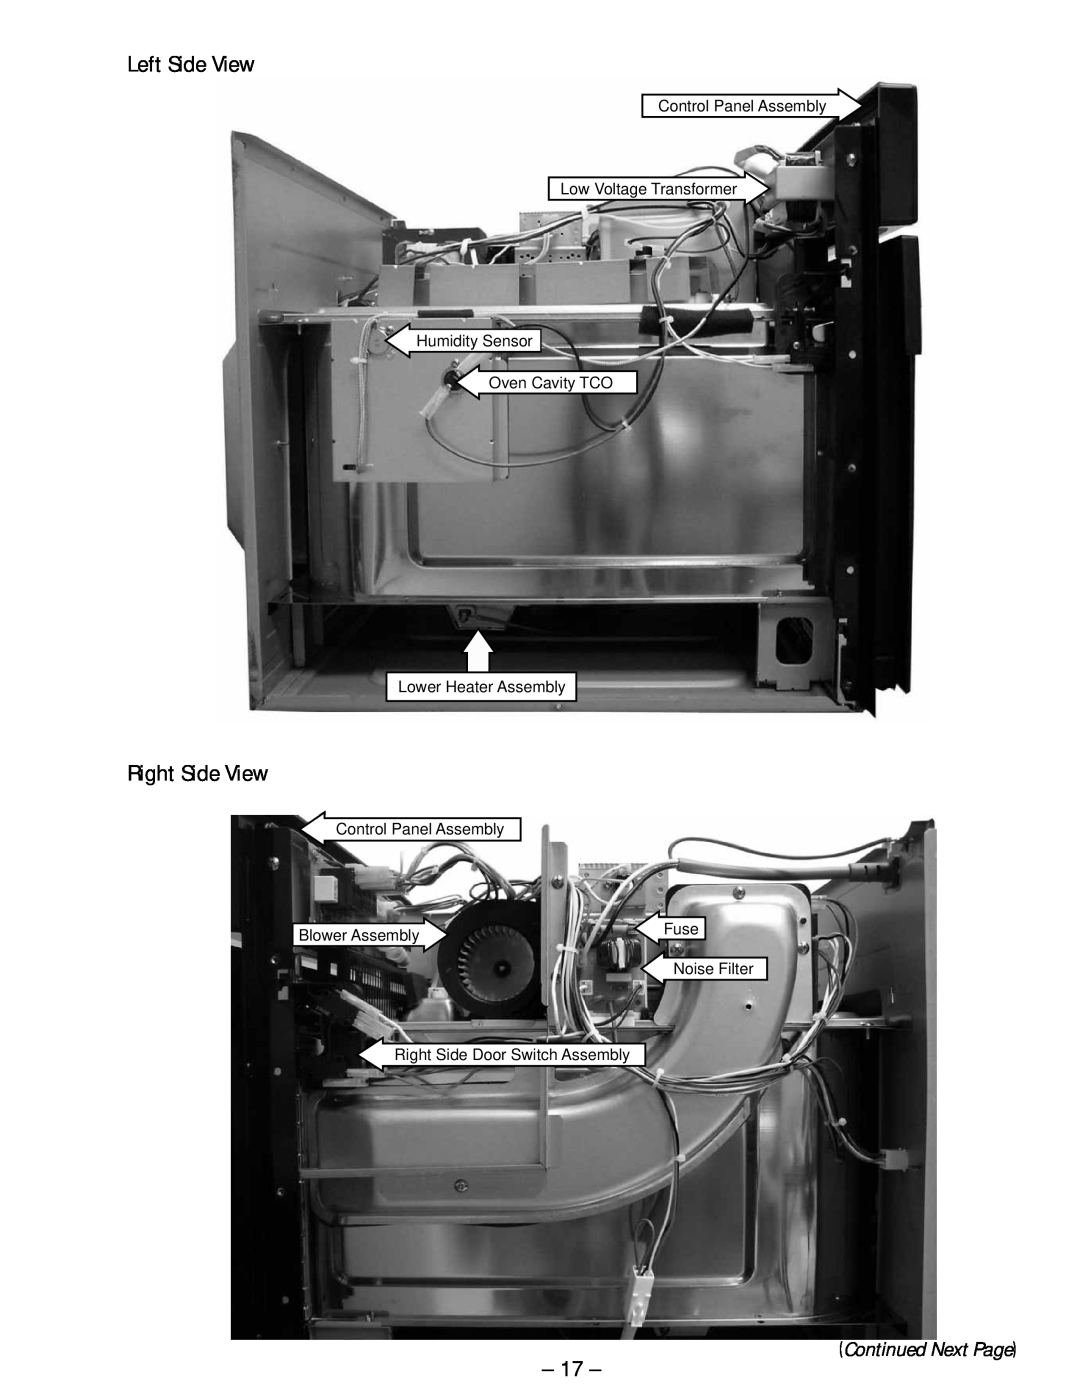 GE ZSC 1000 Left Side View, Right Side View, Continued Next Page, Oven Cavity TCO Lower Heater Assembly, Blower Assembly 